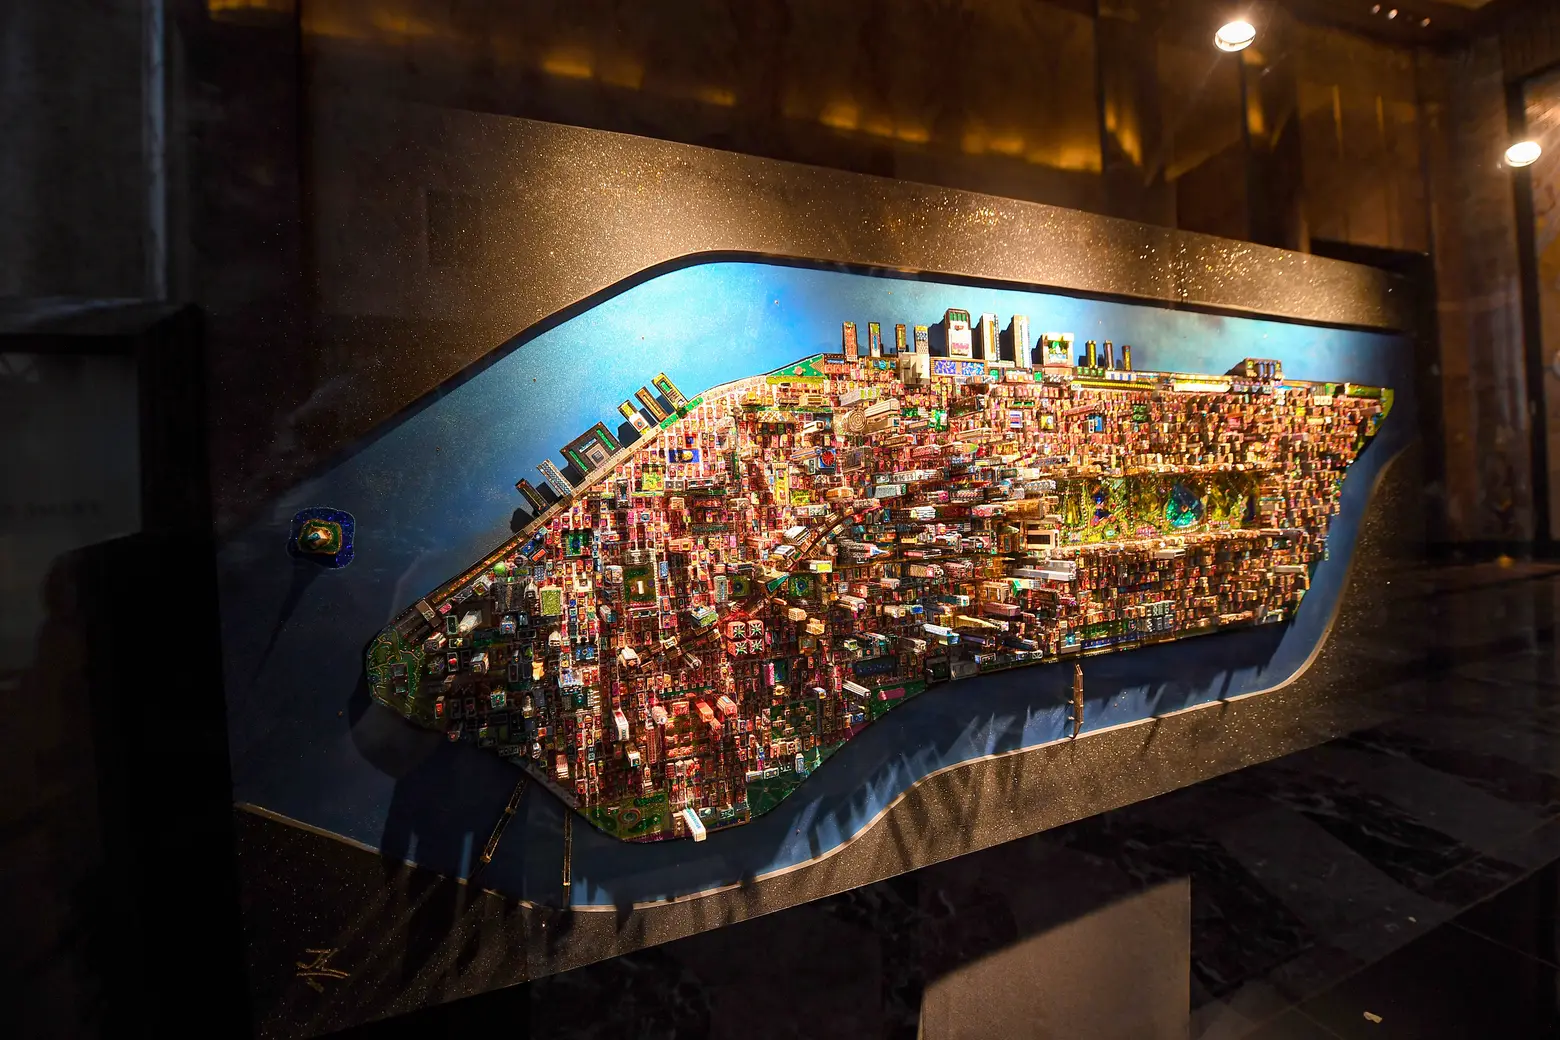 This incredibly detailed 3D replica of Manhattan took 1,000 hours to complete